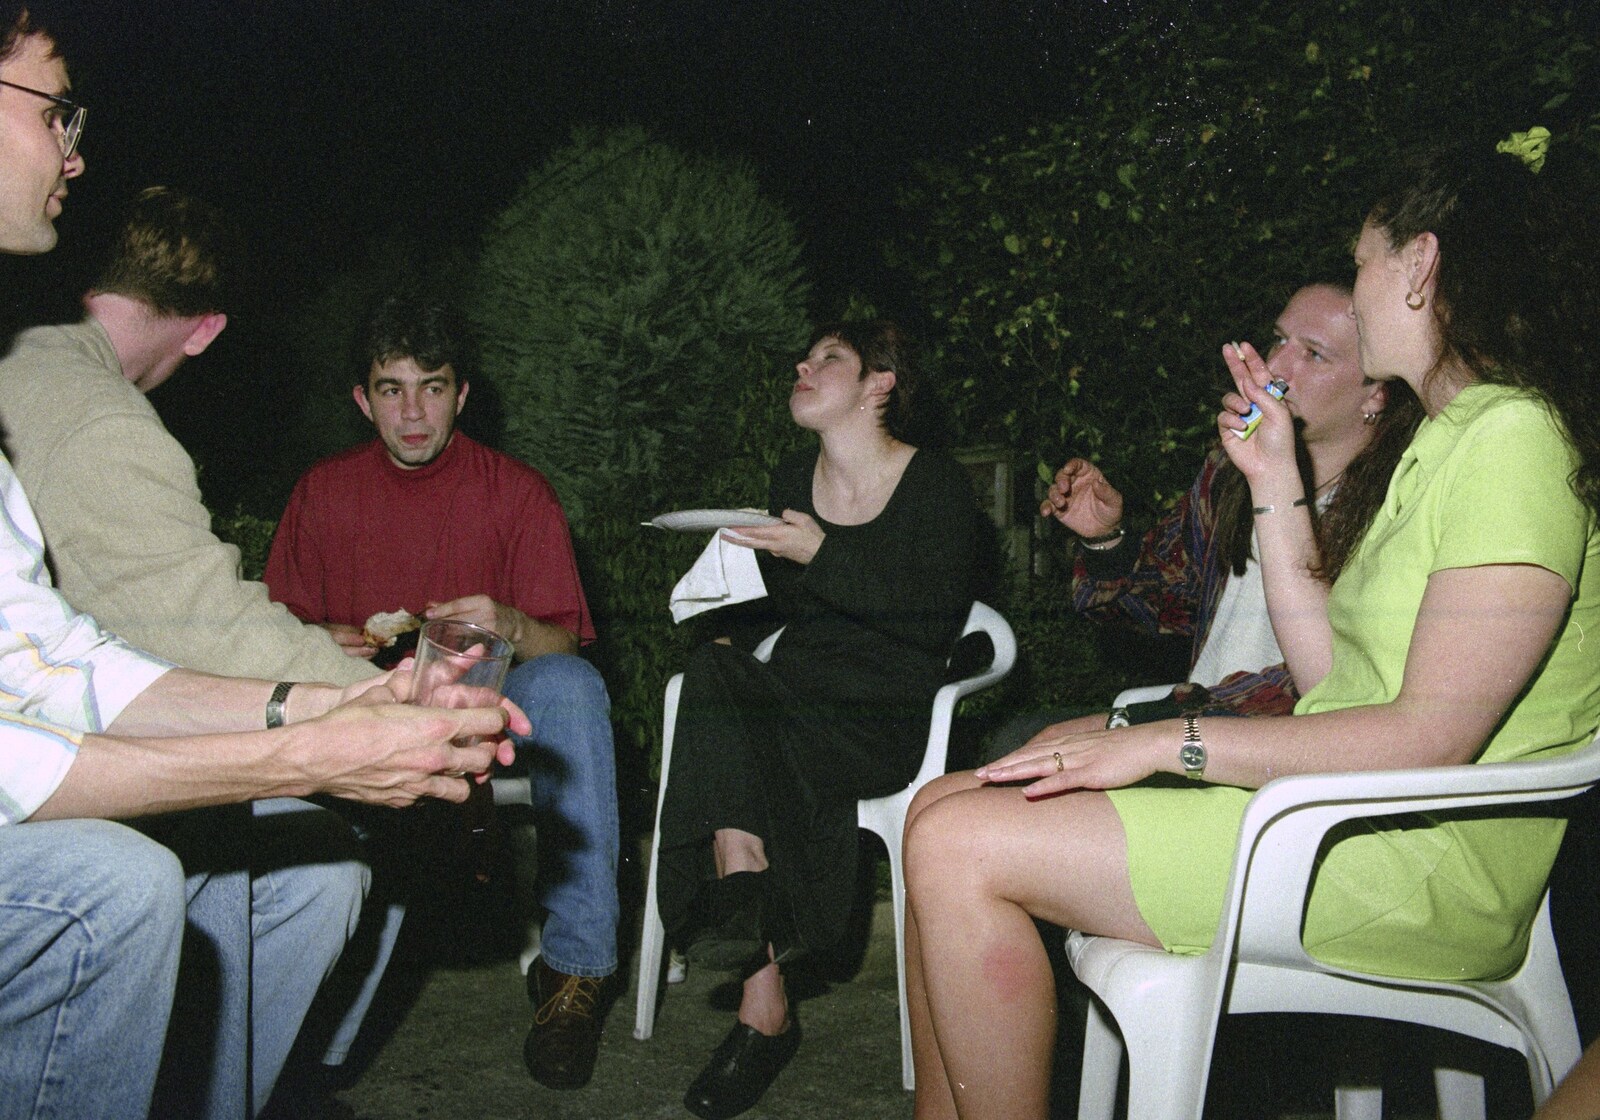 In the garden from Andrew's CISU Party, and Nosher's Garden Barbeque, Ipswich and Brome, Suffolk - June 10th 1998